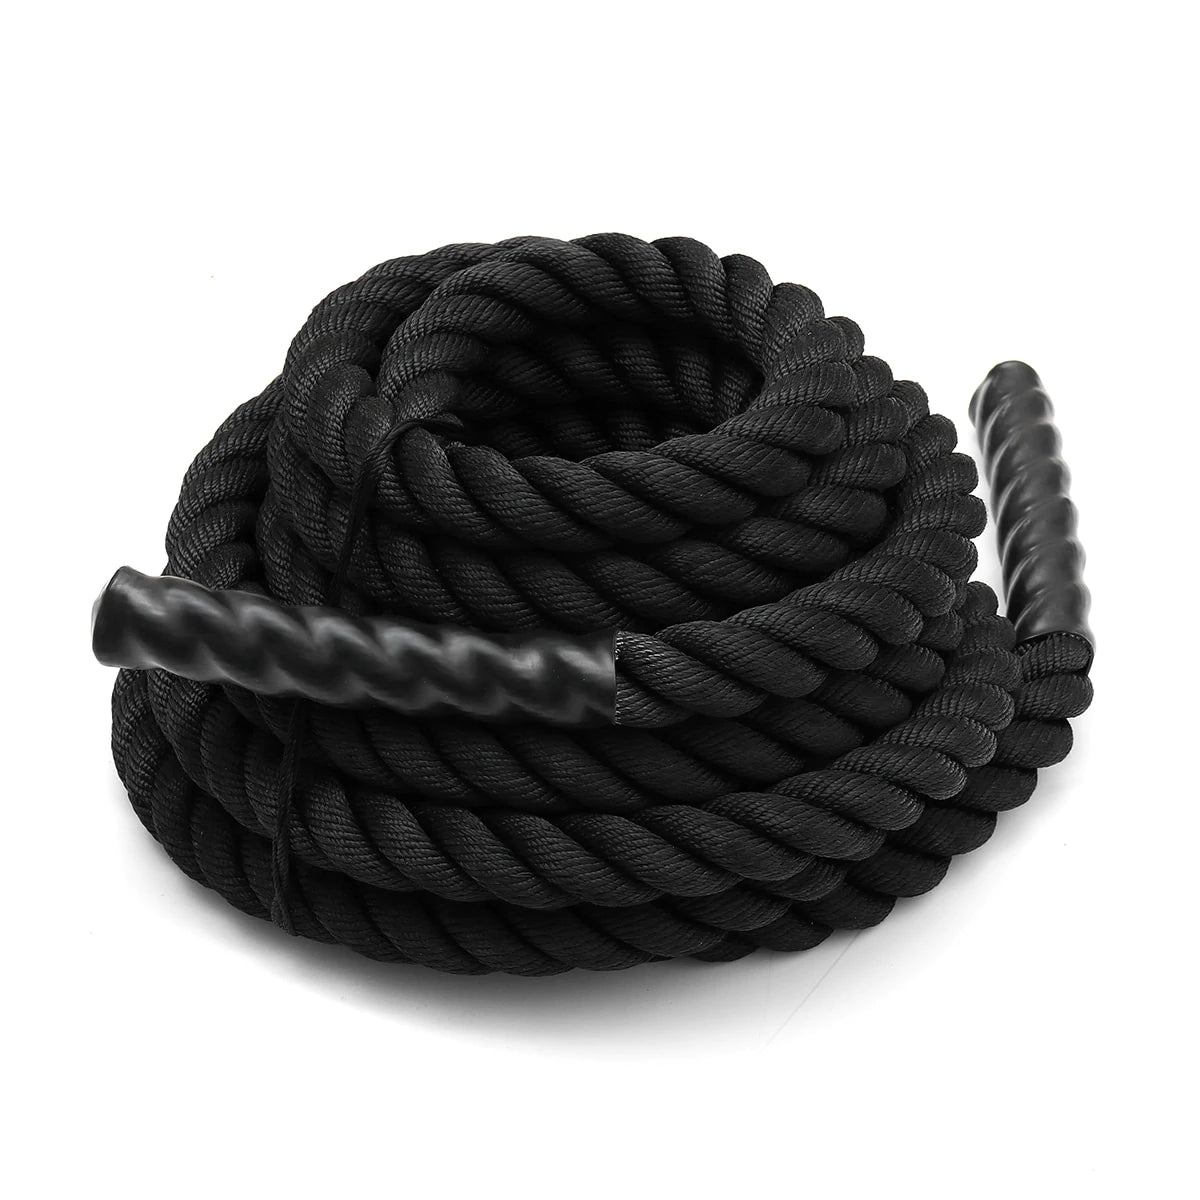 40ft Ultimate Strength Training Rope | Arms | Abs | Shoulders | Legs | Group Fitness